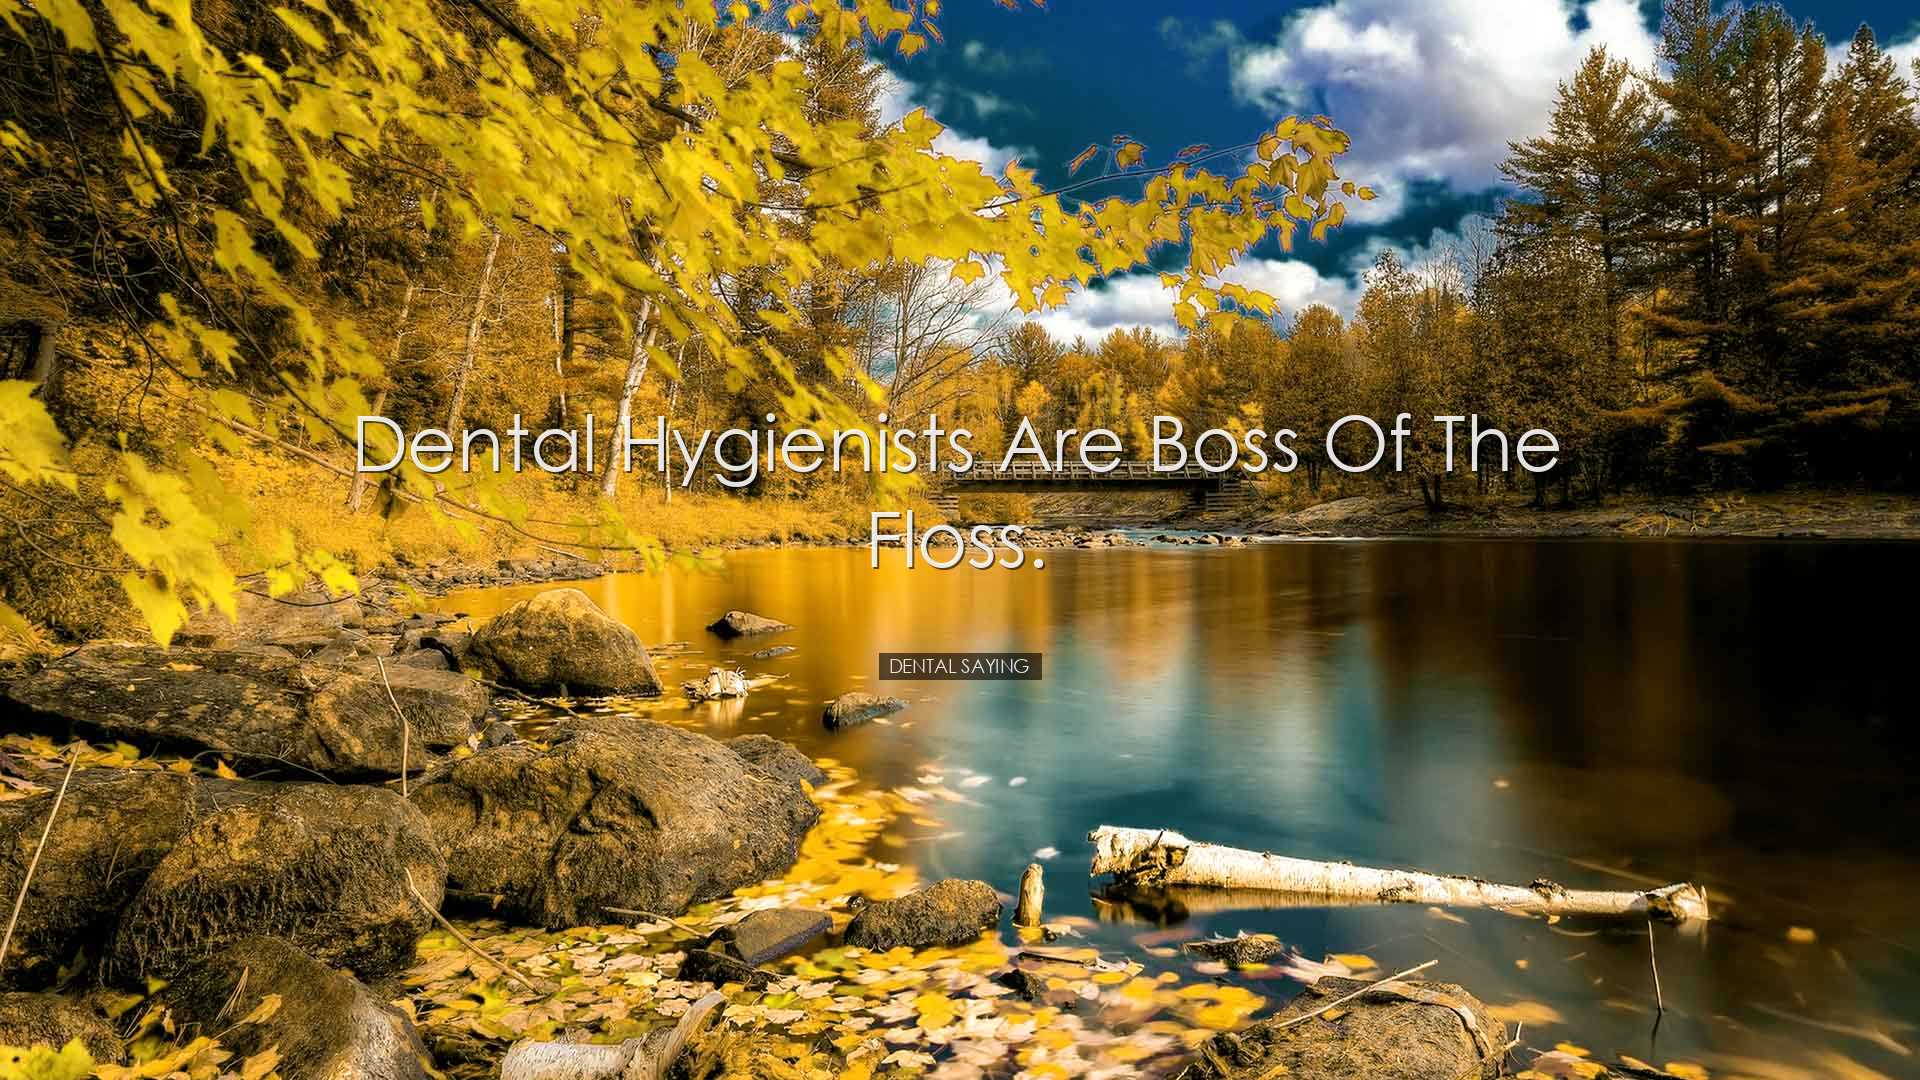 Dental hygienists are boss of the floss. - Dental Saying